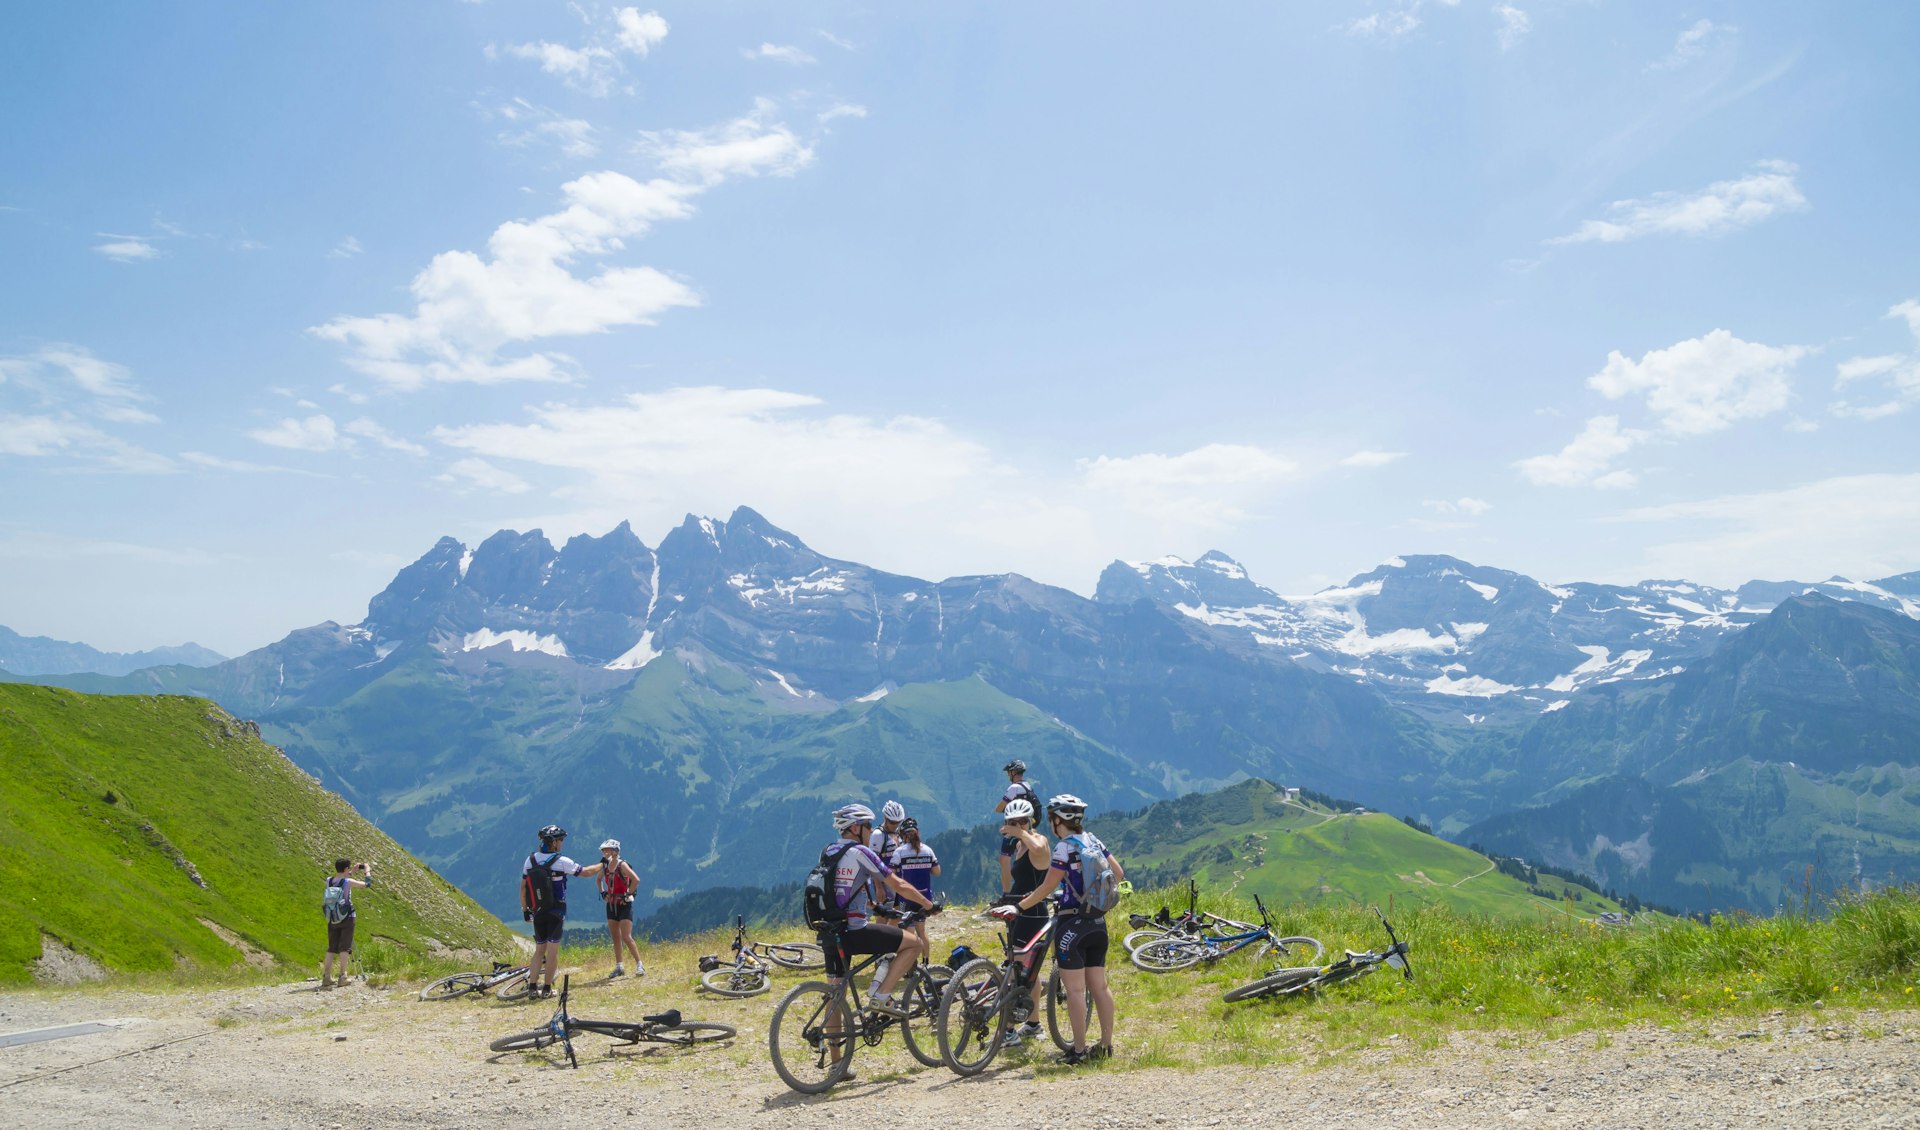 Mountain bikers stop for a break at a picturesque lookout over the Swiss Alps, in the Portes du Soleil region.